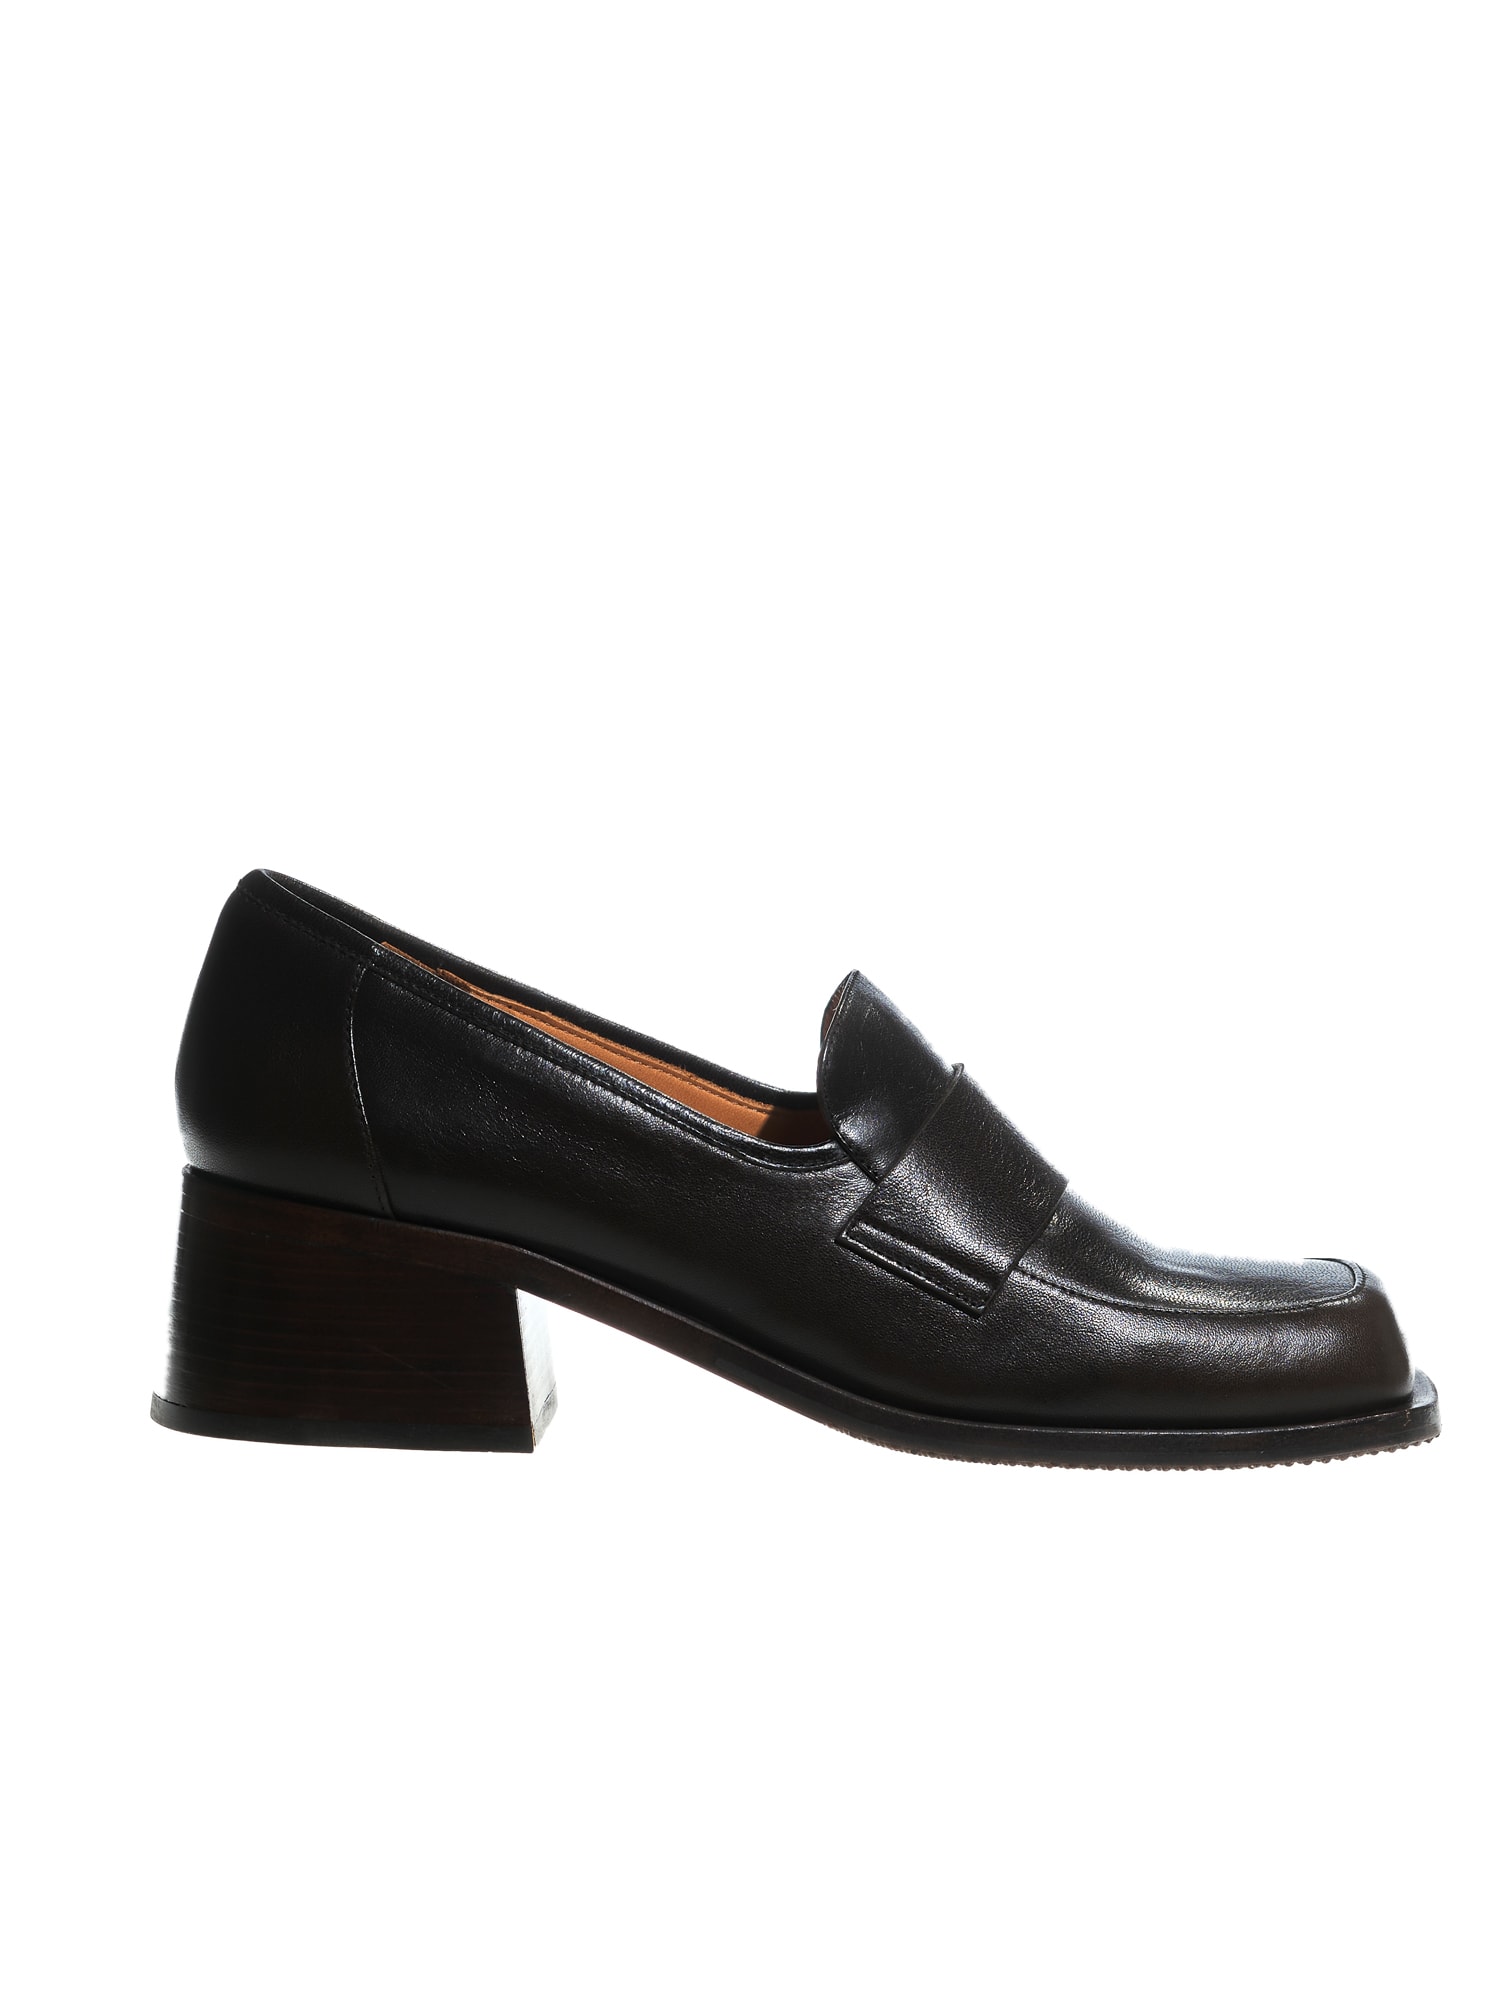 Chie Mihara Loafer